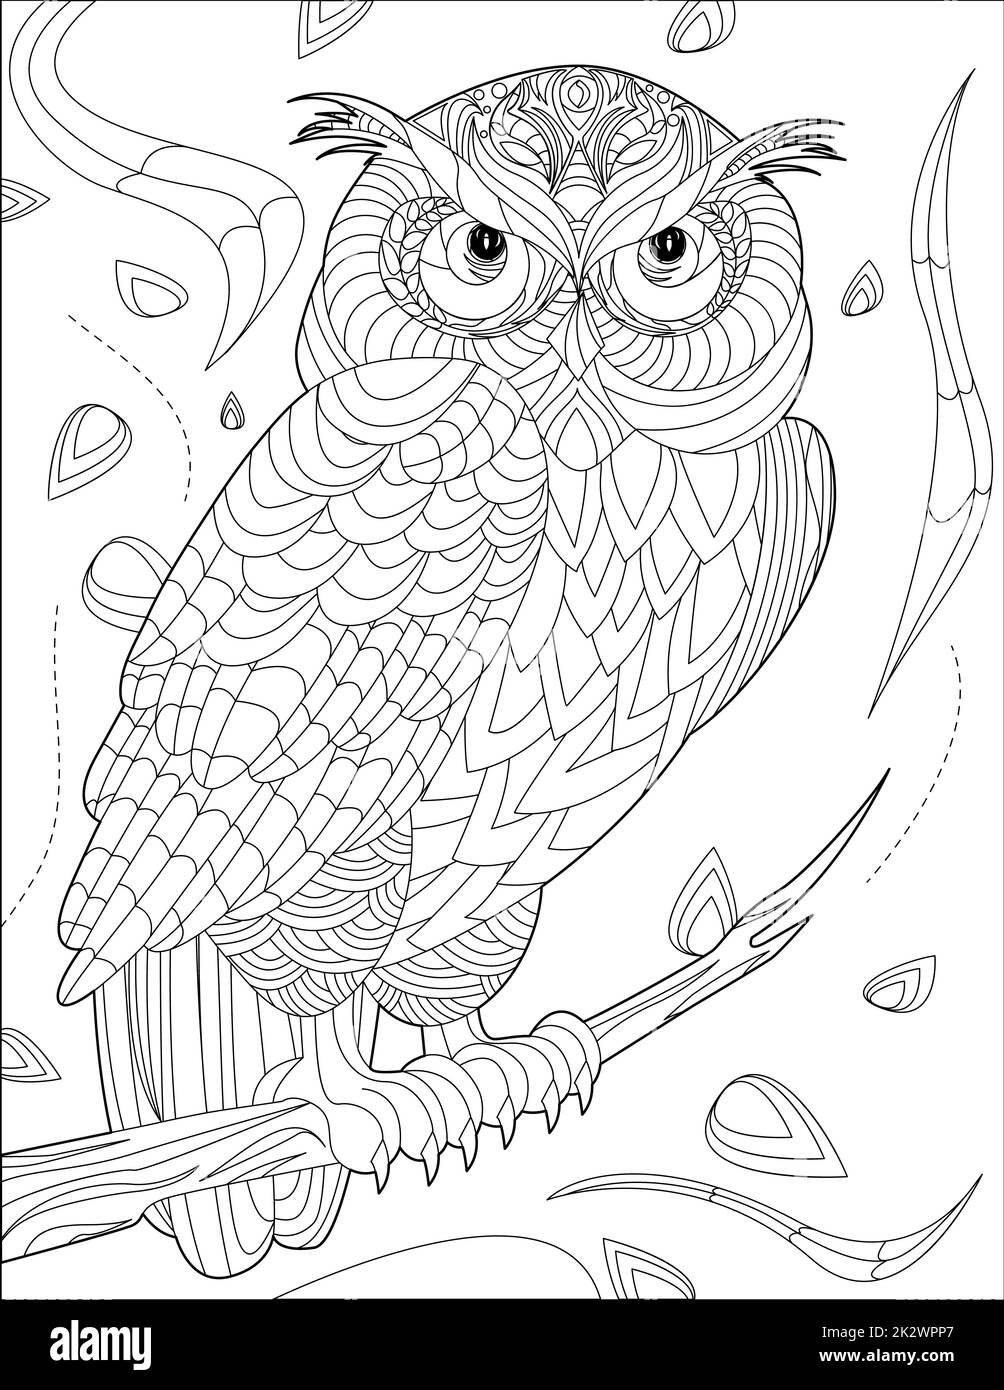 Owl Standing On Tree Branch With Geometric Details Line Drawing For Coloring Book Stock Photo